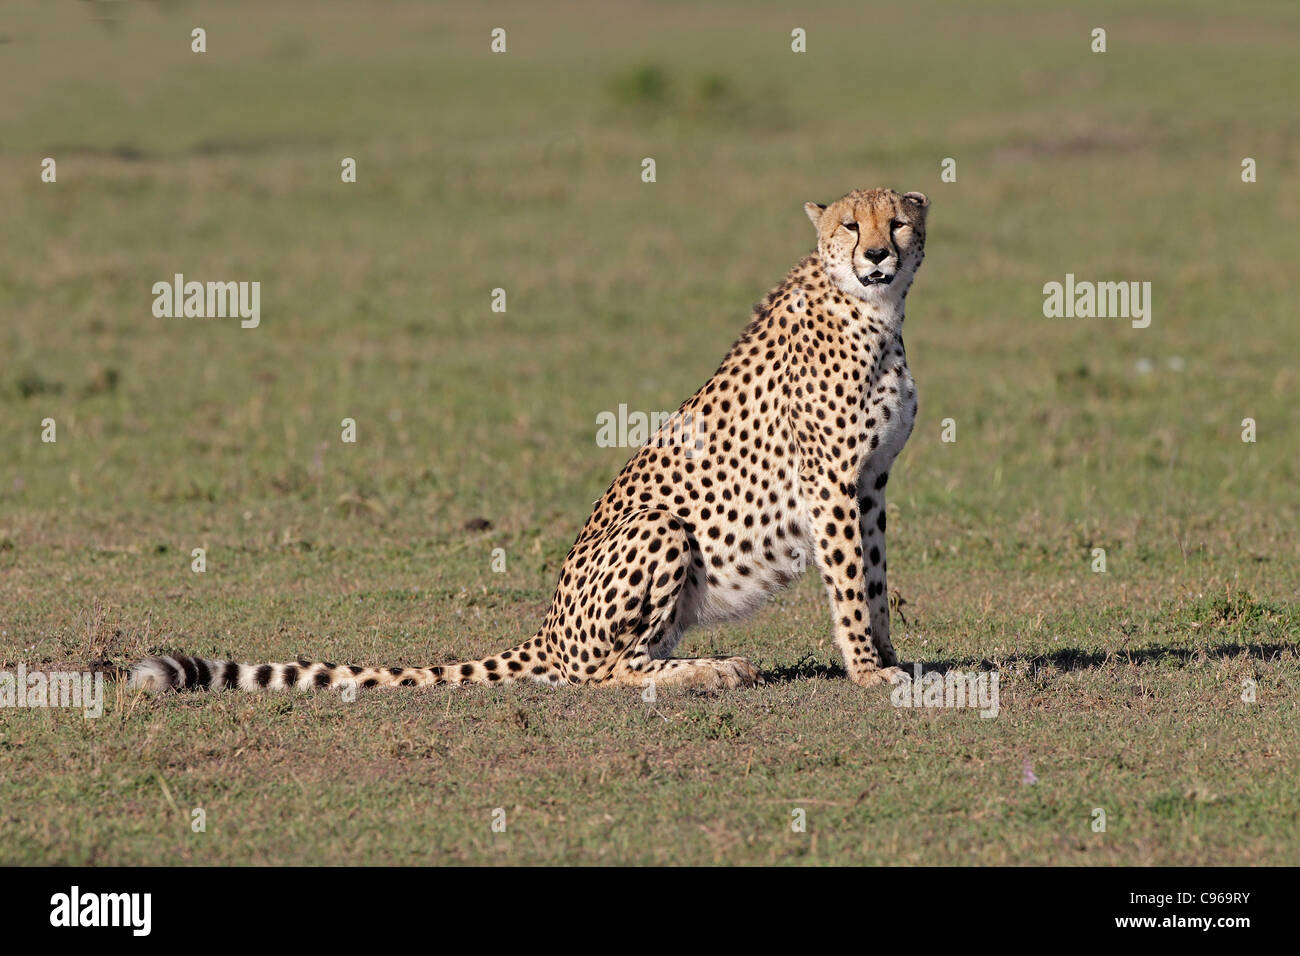 Cheetah sitting with tail outstretched Stock Photo